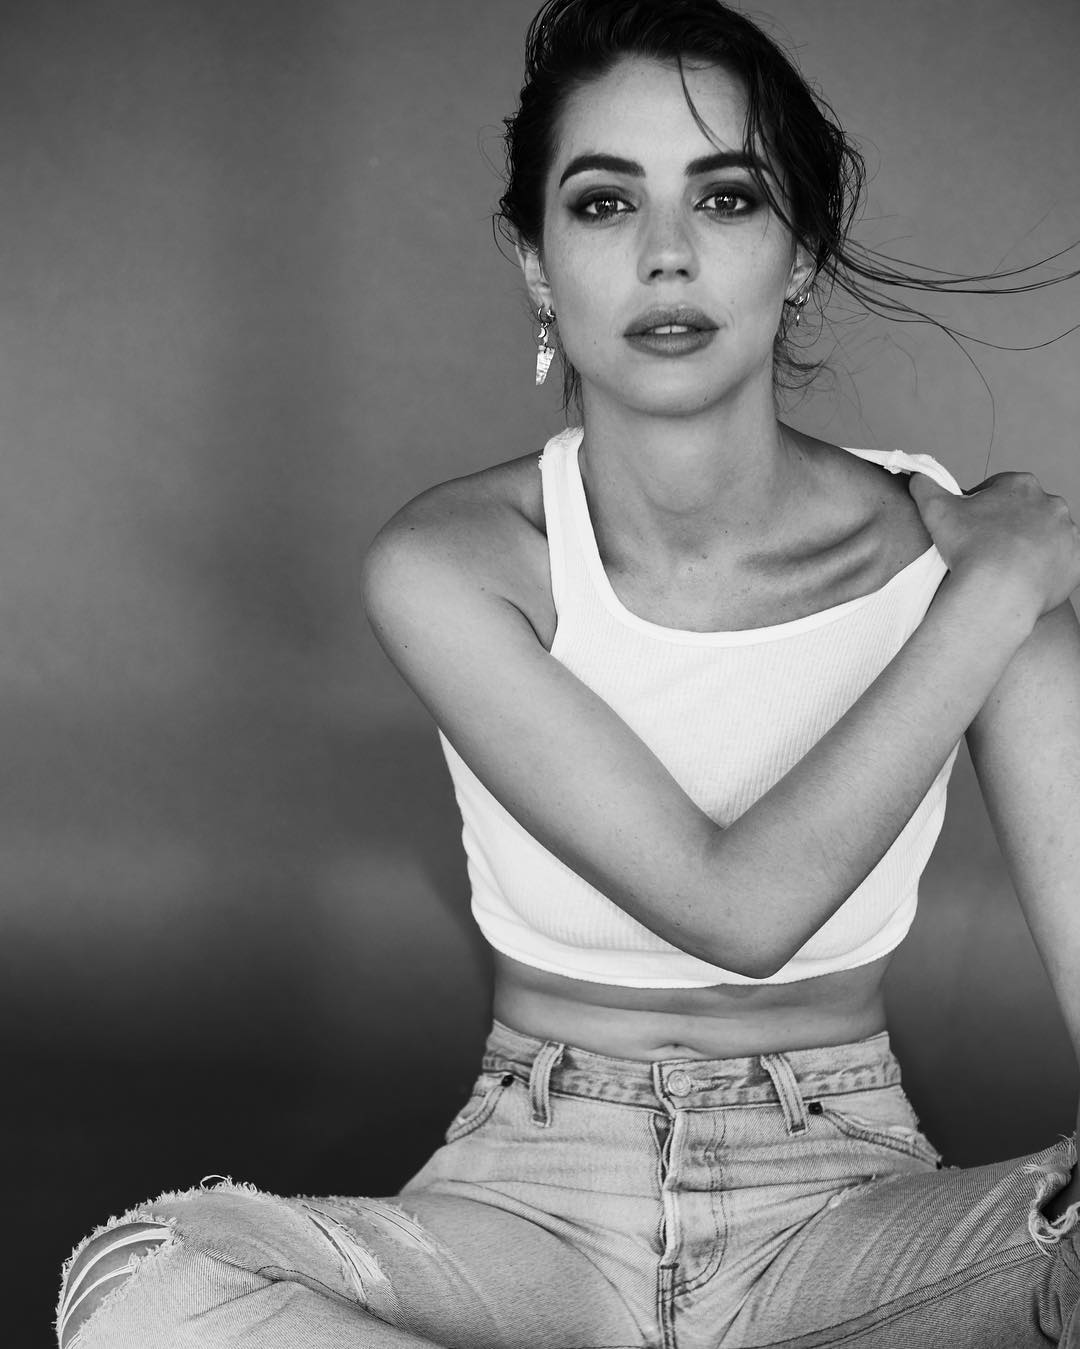 Tits adelaide kane 41 Sexiest